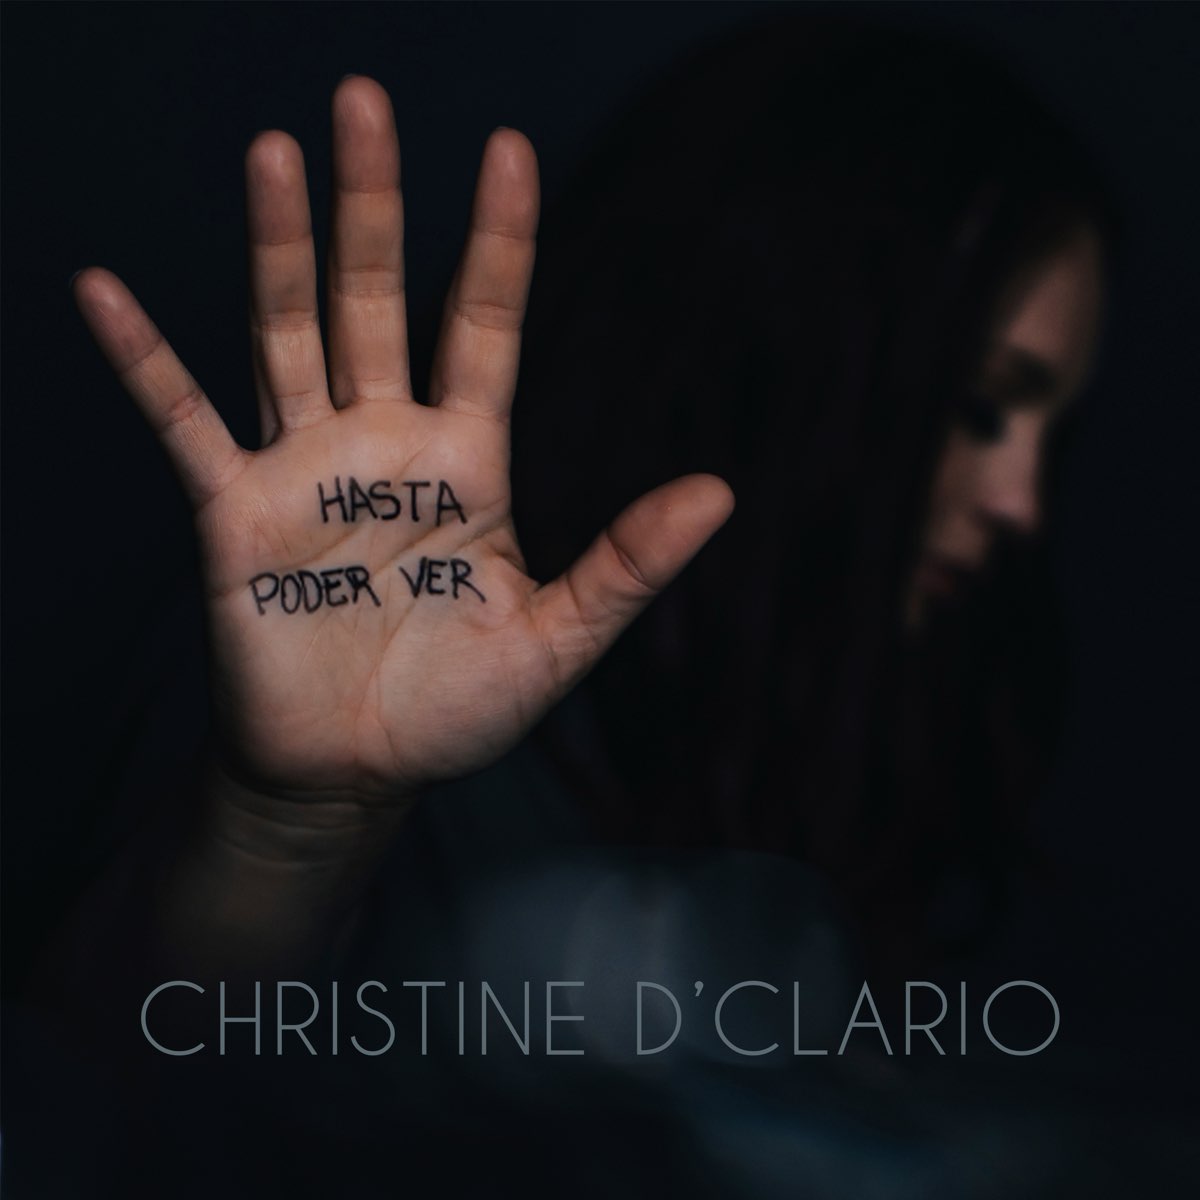 Hasta poder ver - Single by Christine D'Clario on Apple Music